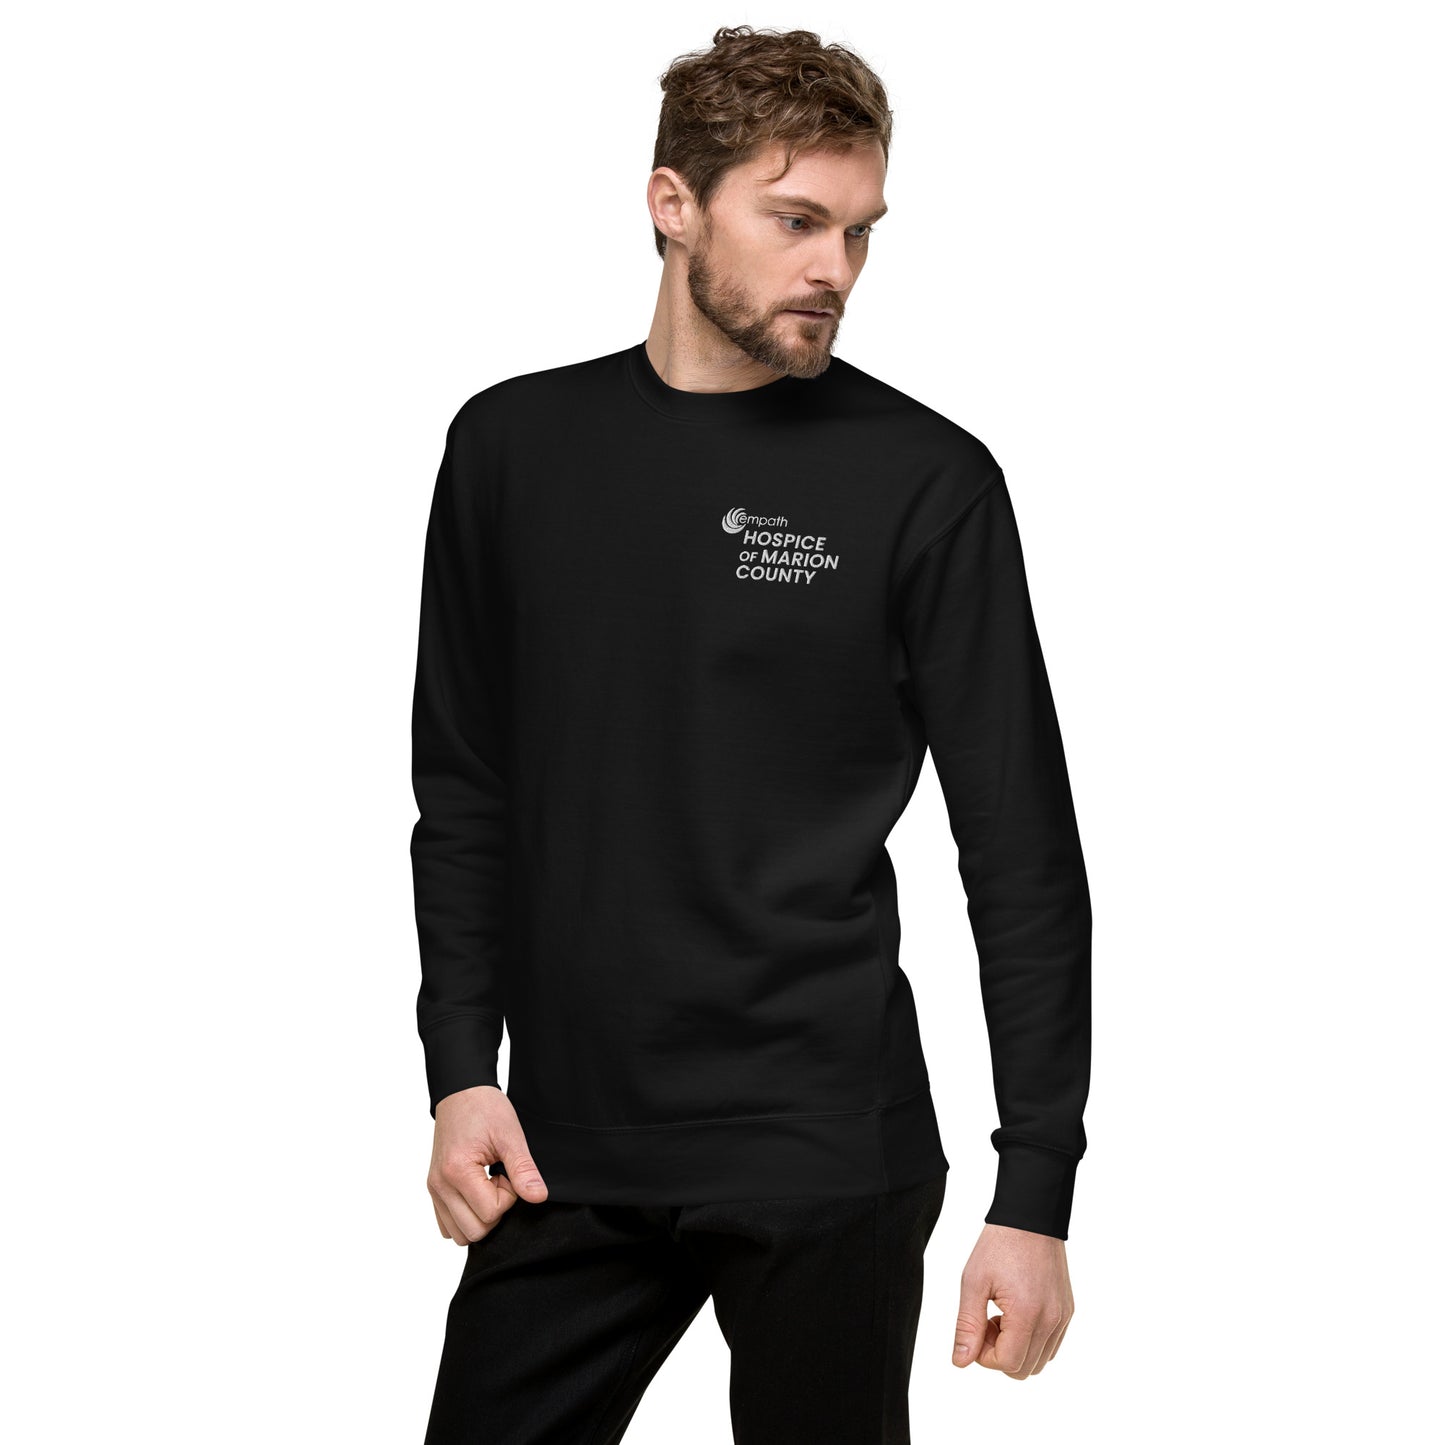 Unisex Premium Sweatshirt (fitted cut) - Hospice of Marion County ...